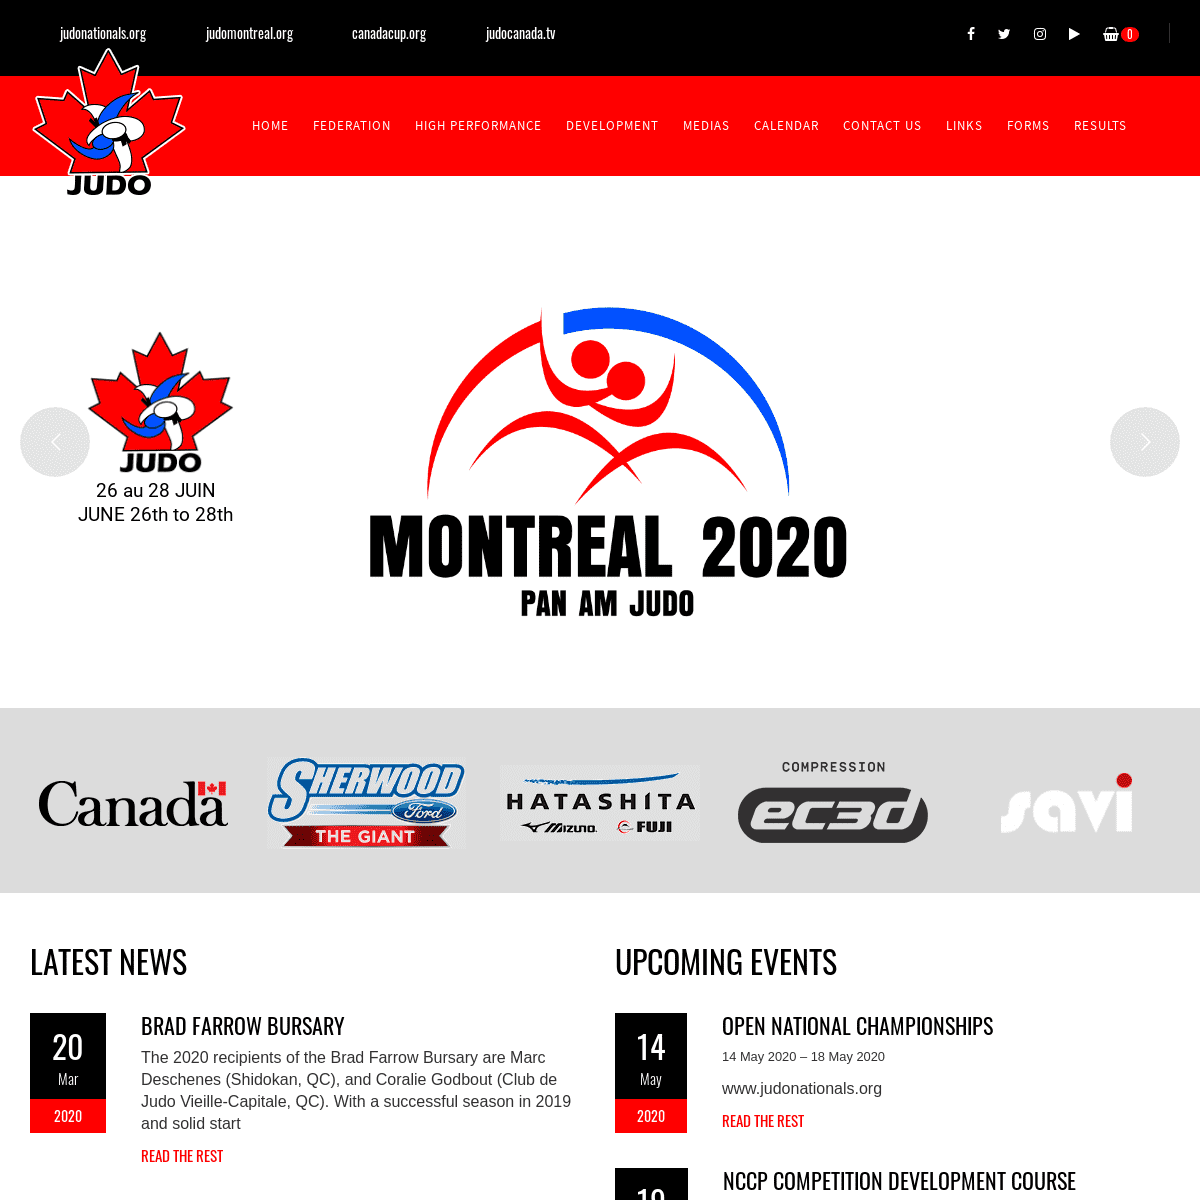 A complete backup of judocanada.org